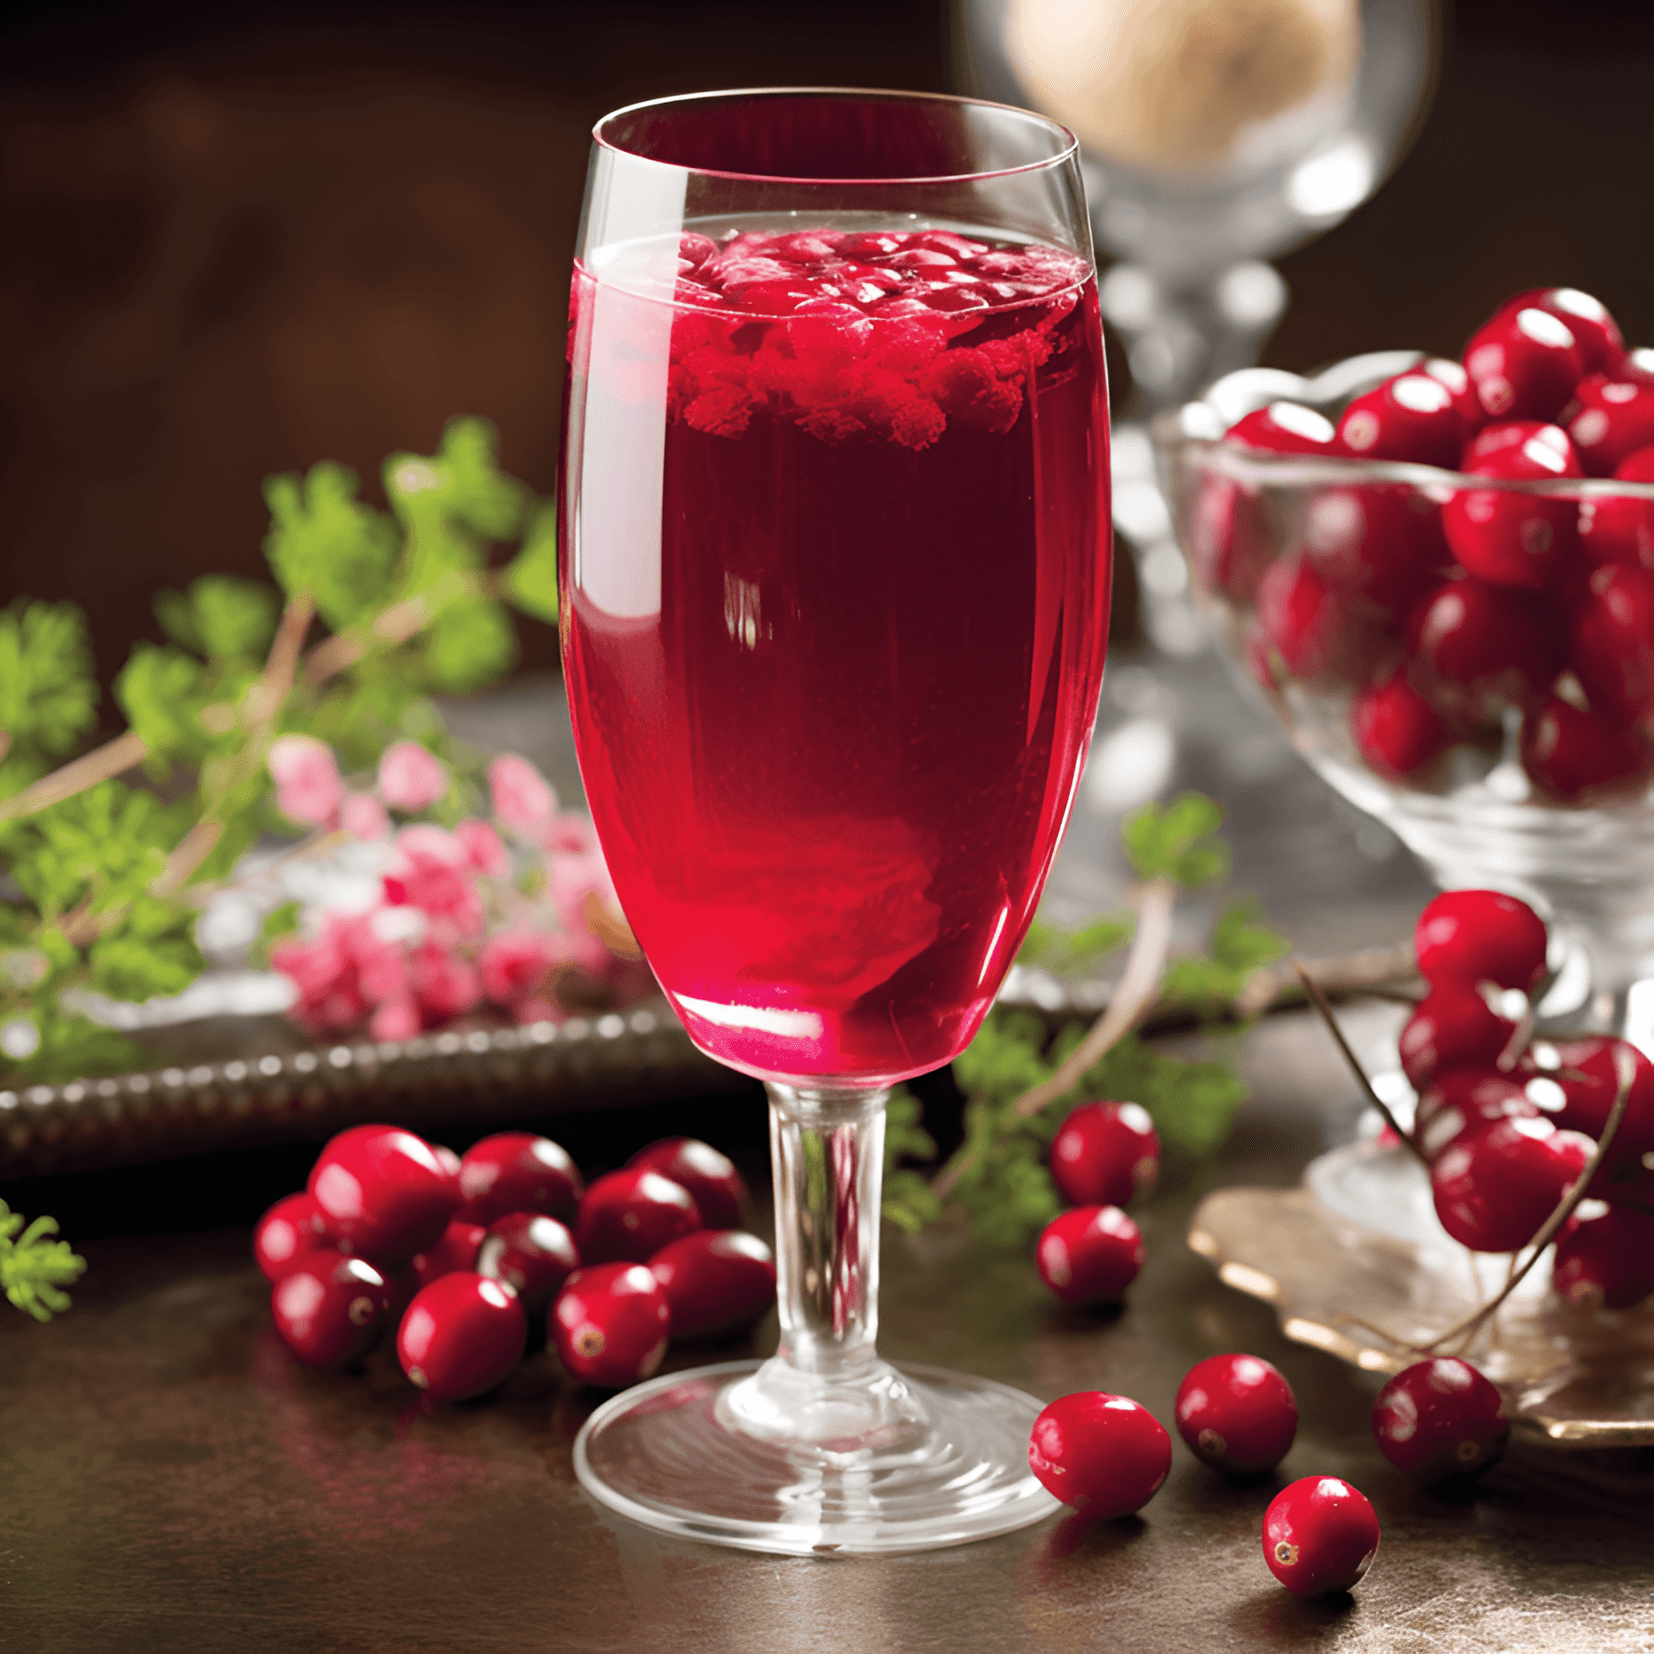 Poinsettia Cocktail Recipe - The Poinsettia cocktail has a light, refreshing, and slightly sweet taste. The combination of cranberry juice, orange liqueur, and champagne creates a delightful balance of fruity and bubbly flavors, with a hint of tartness from the cranberry juice.